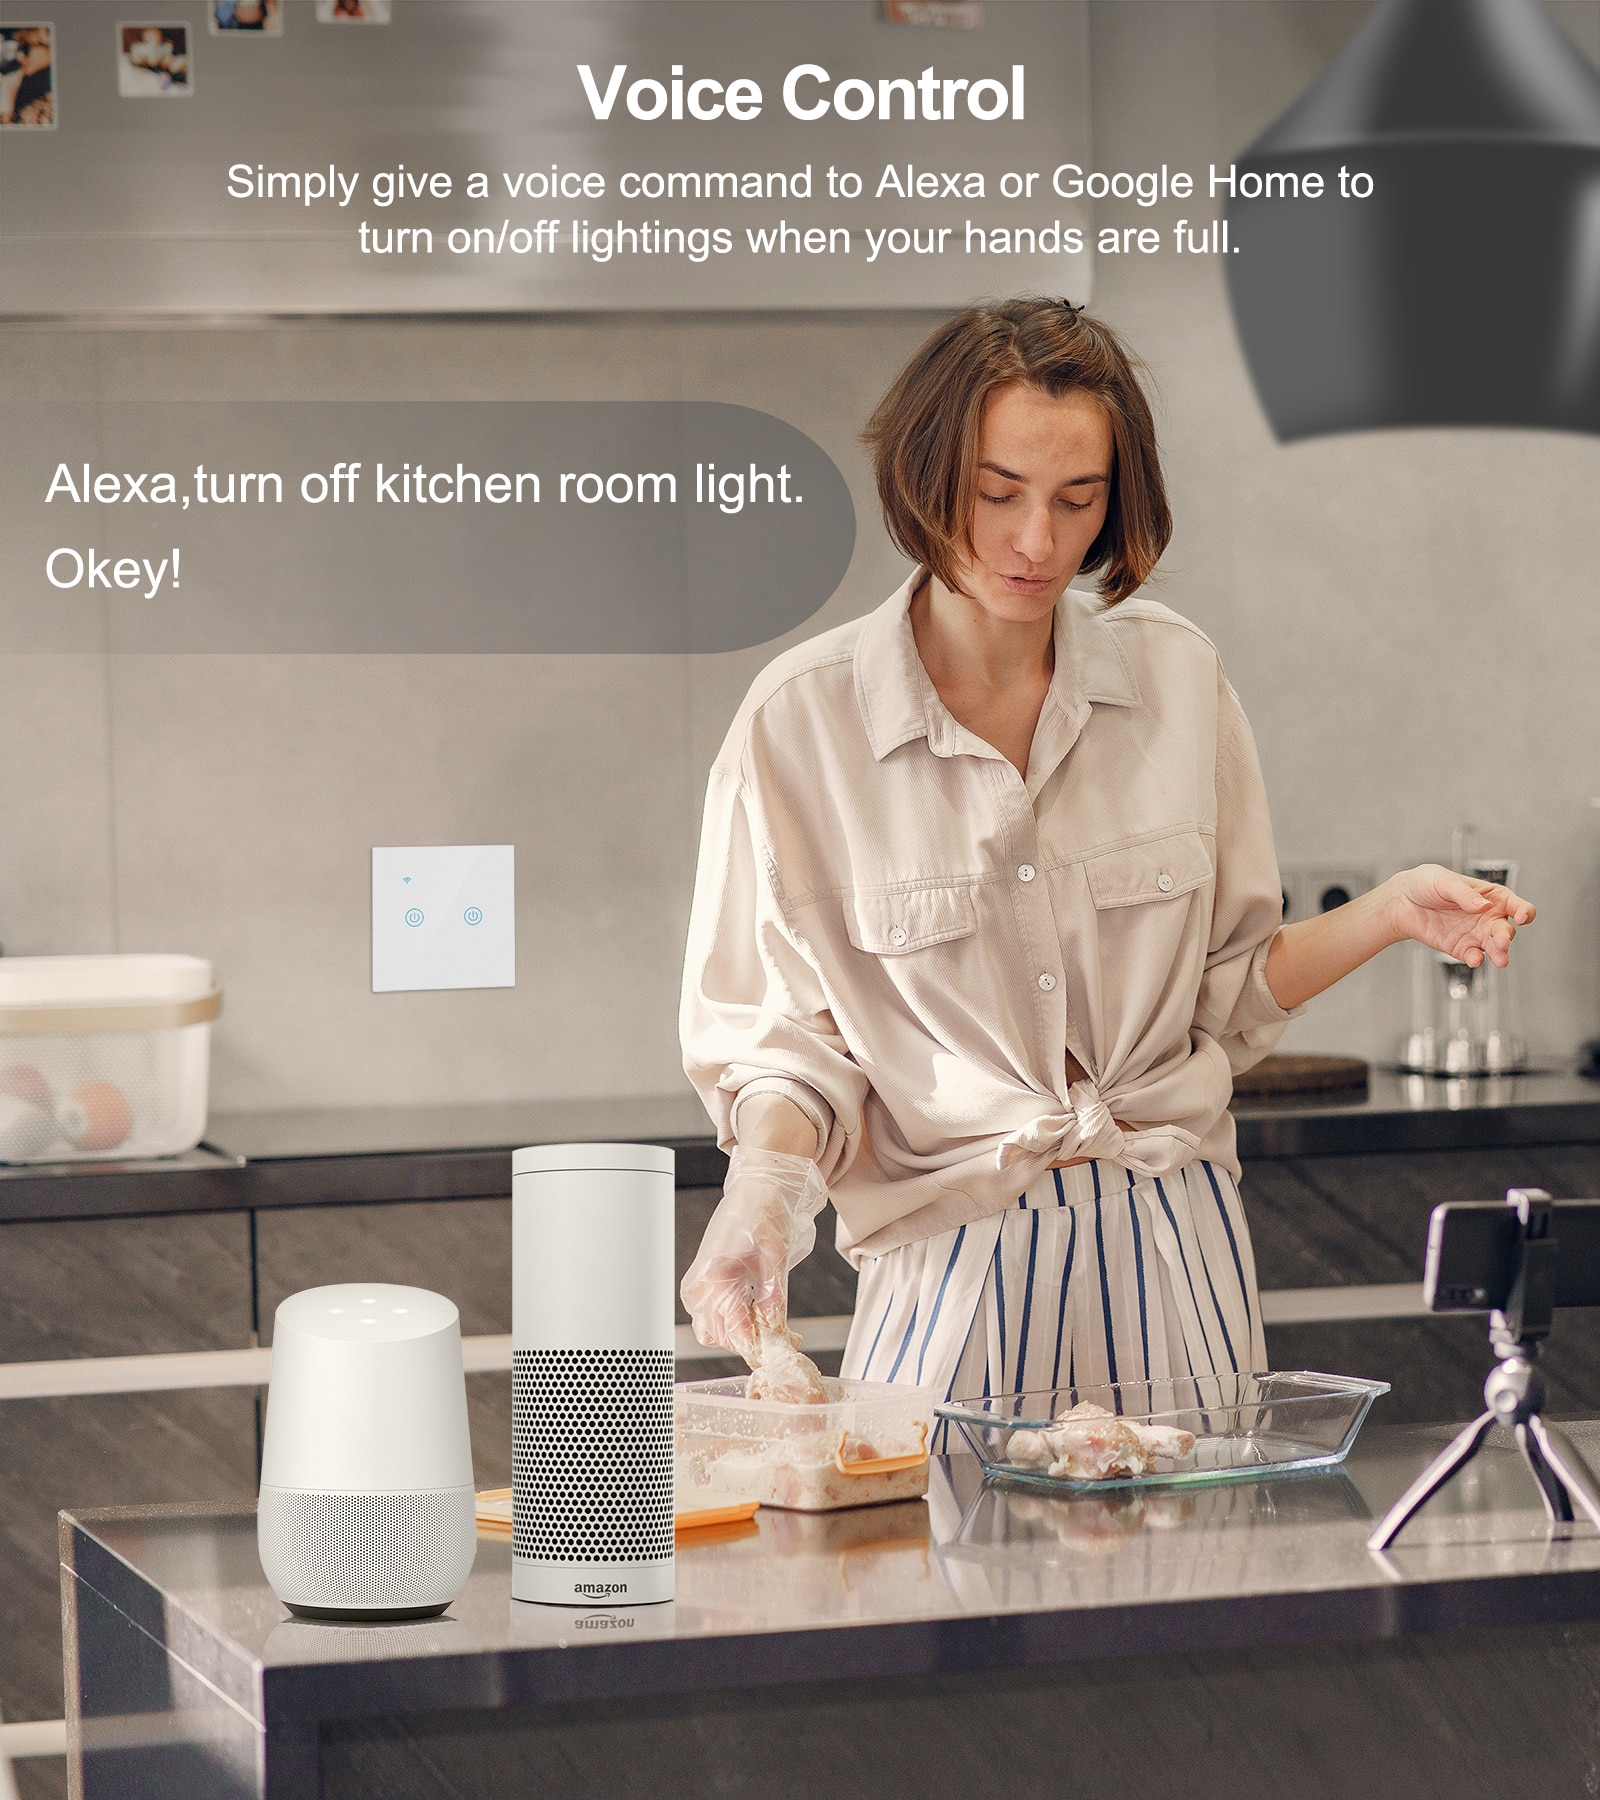 Lumive Smart Light Switch Works With Alexa & Google Home [3 Gangs